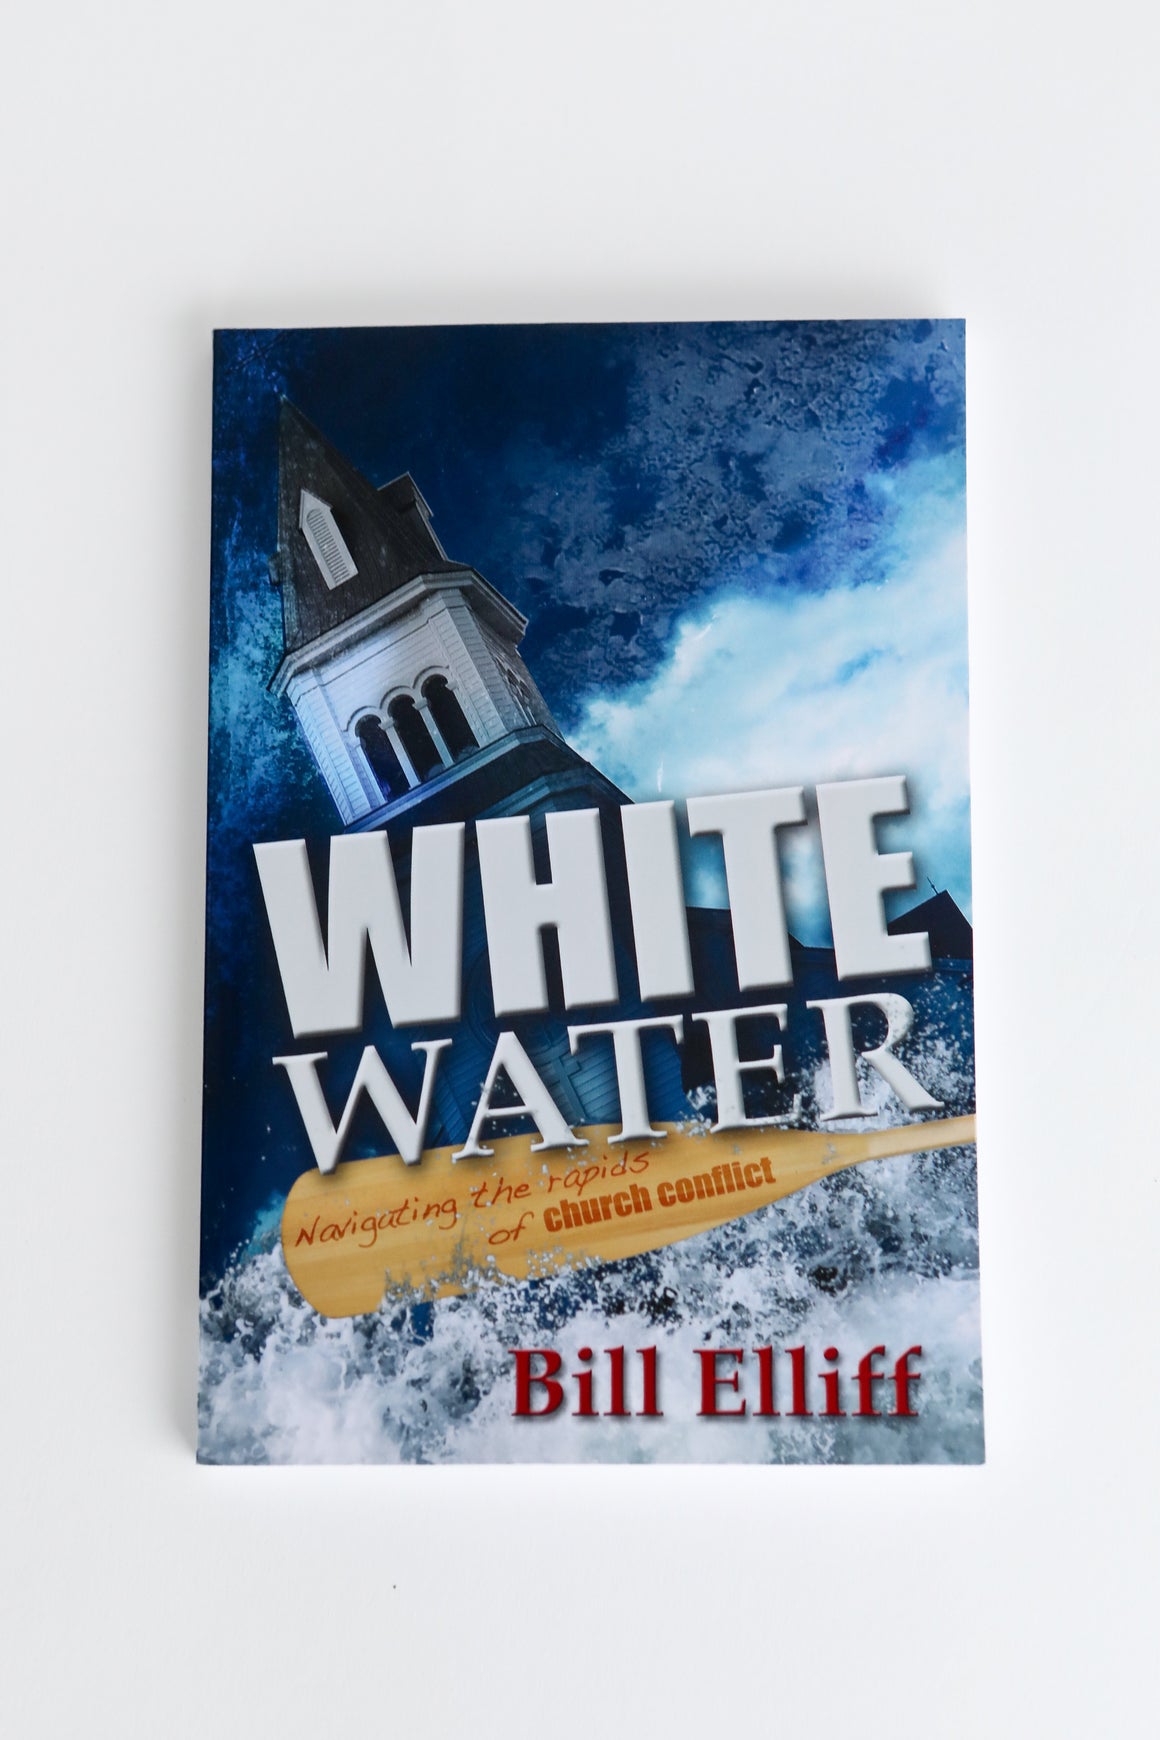 WhiteWater: Navigating the Rapids of Church Conflict-Bill Elliff